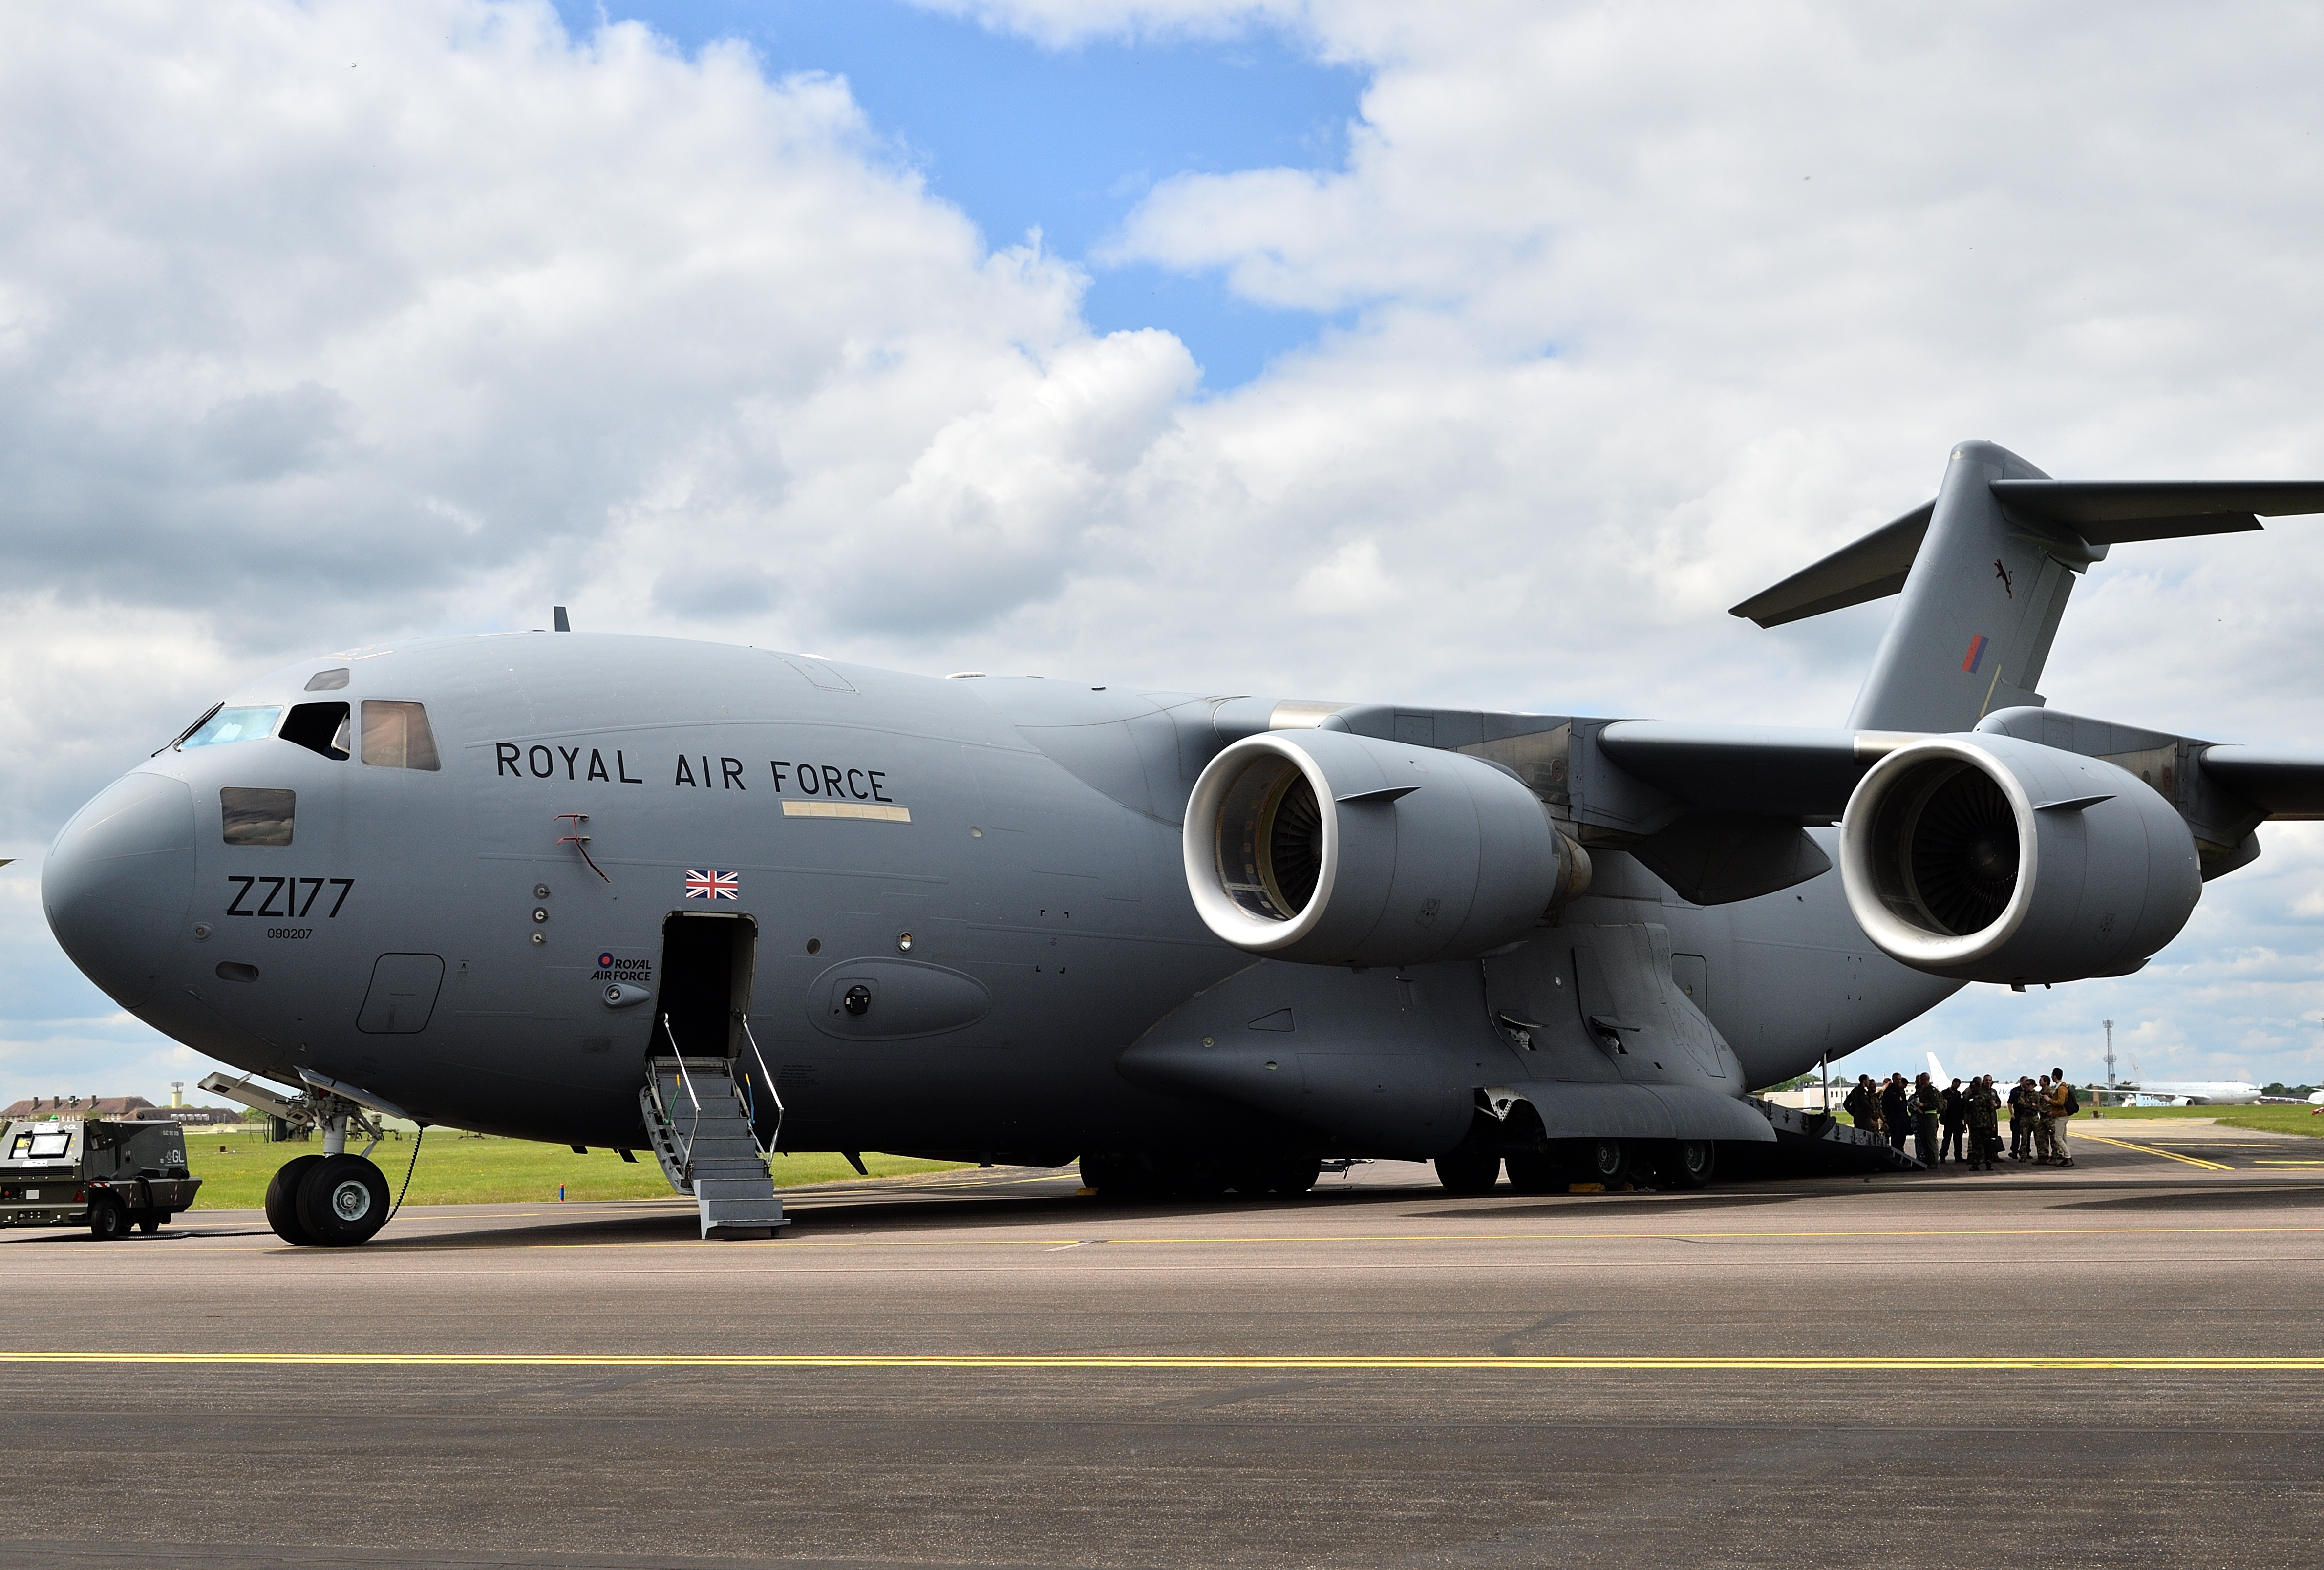 Image shows an RAF C-17 aircraft on the ground.